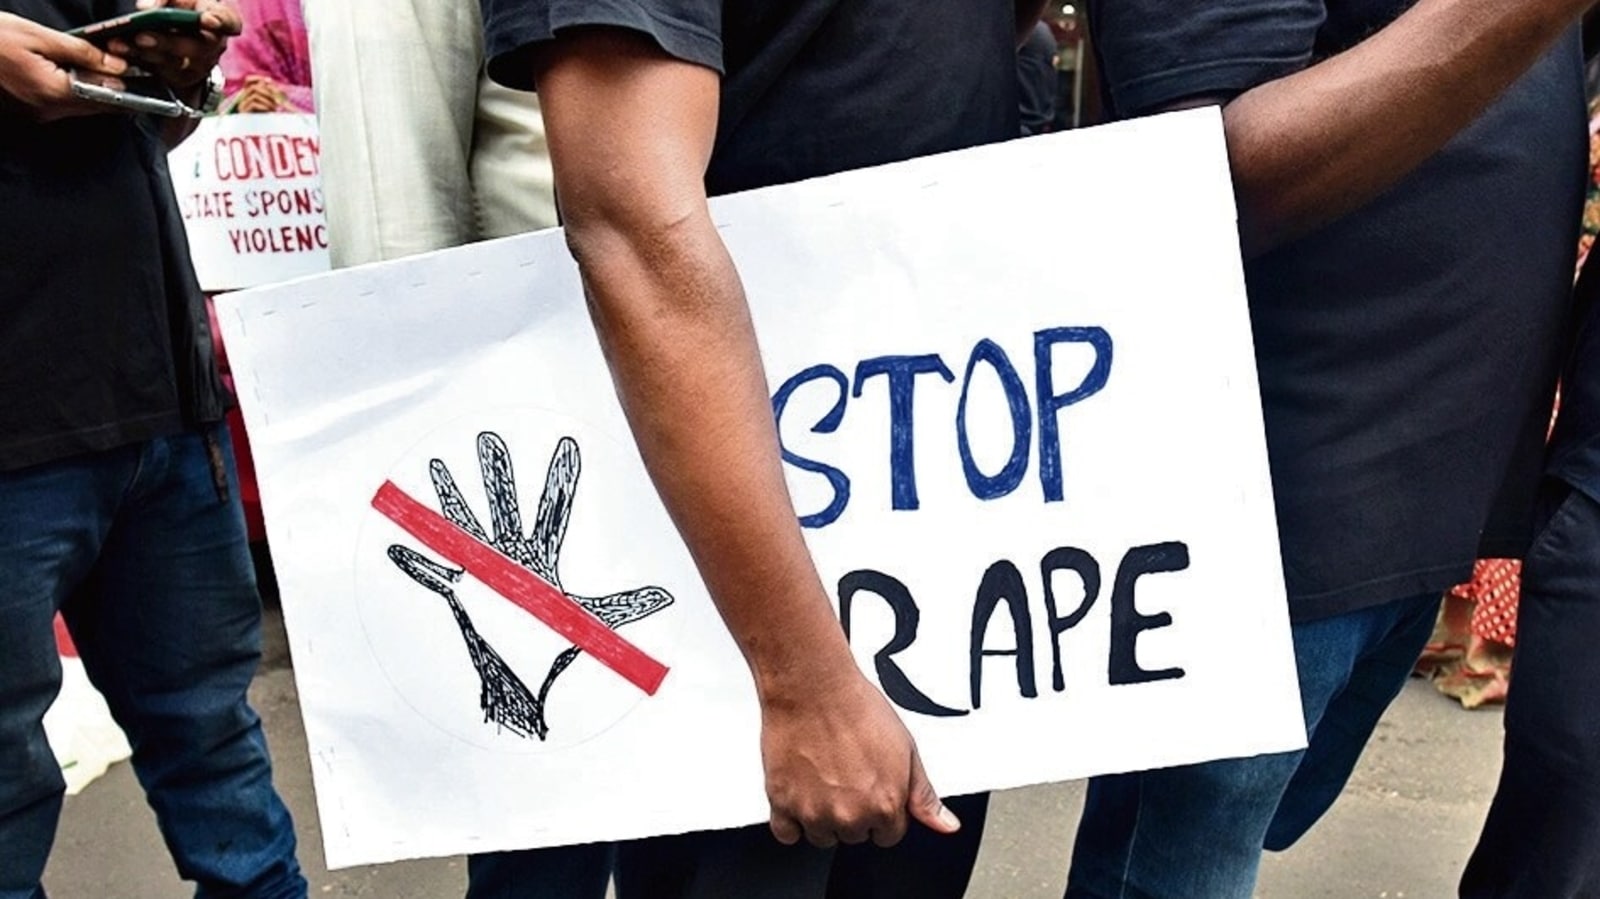 Xxx Repes - Daily brief: Teenager rapes minor girl after watching porn, strangles her |  Latest News India - Hindustan Times